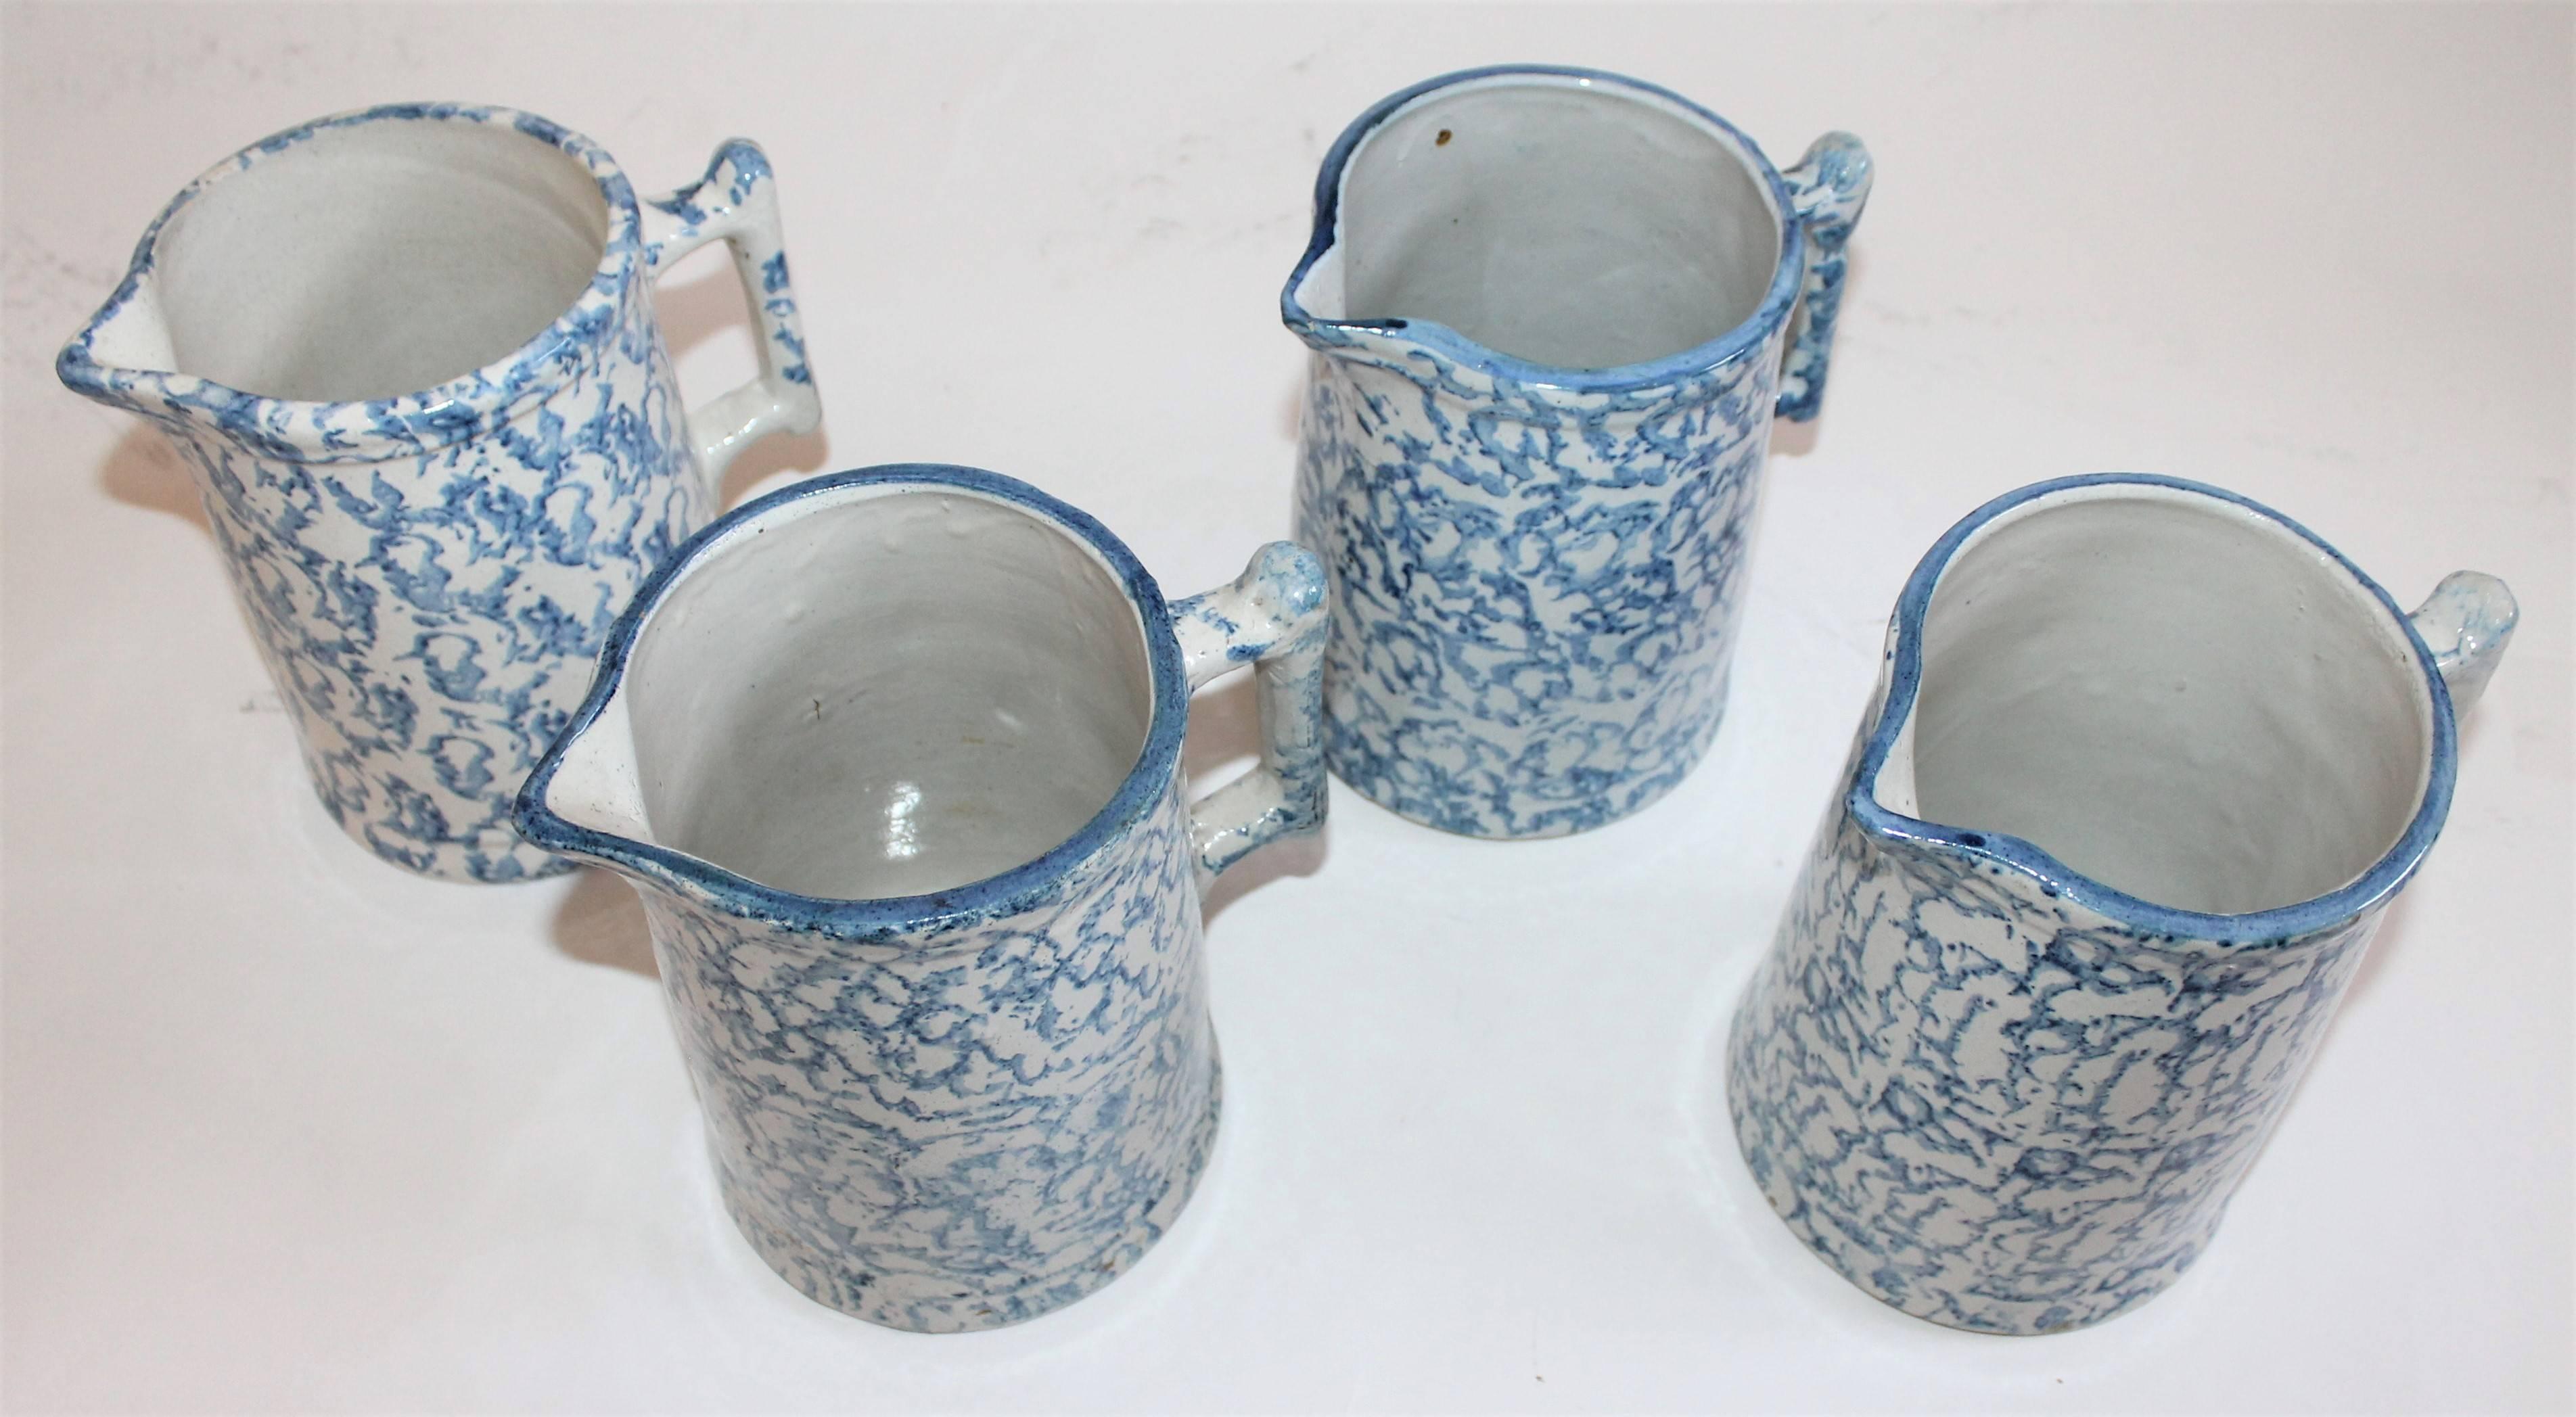 Country Collection of Four 19th Century Sponge Ware Milk Pitcher